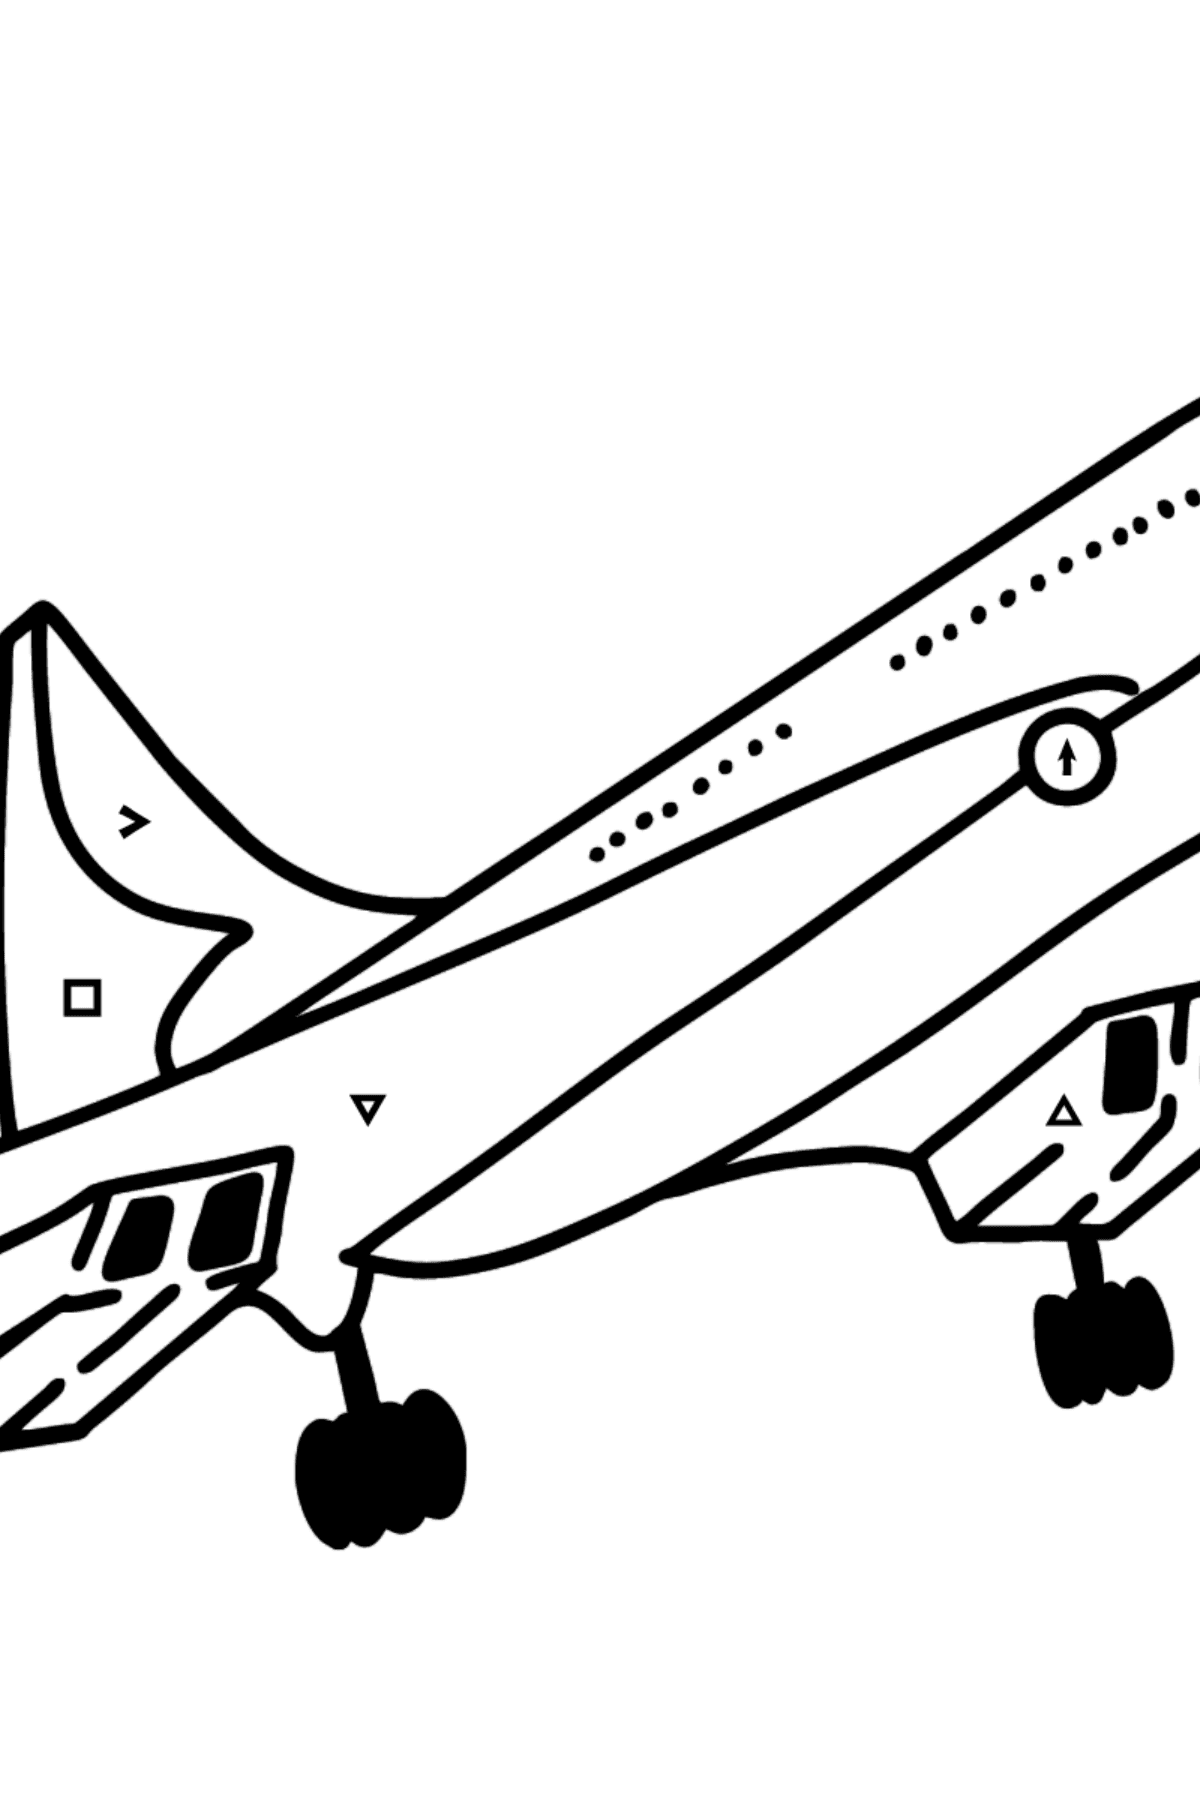 Concorde coloring page - Coloring by Symbols for Kids